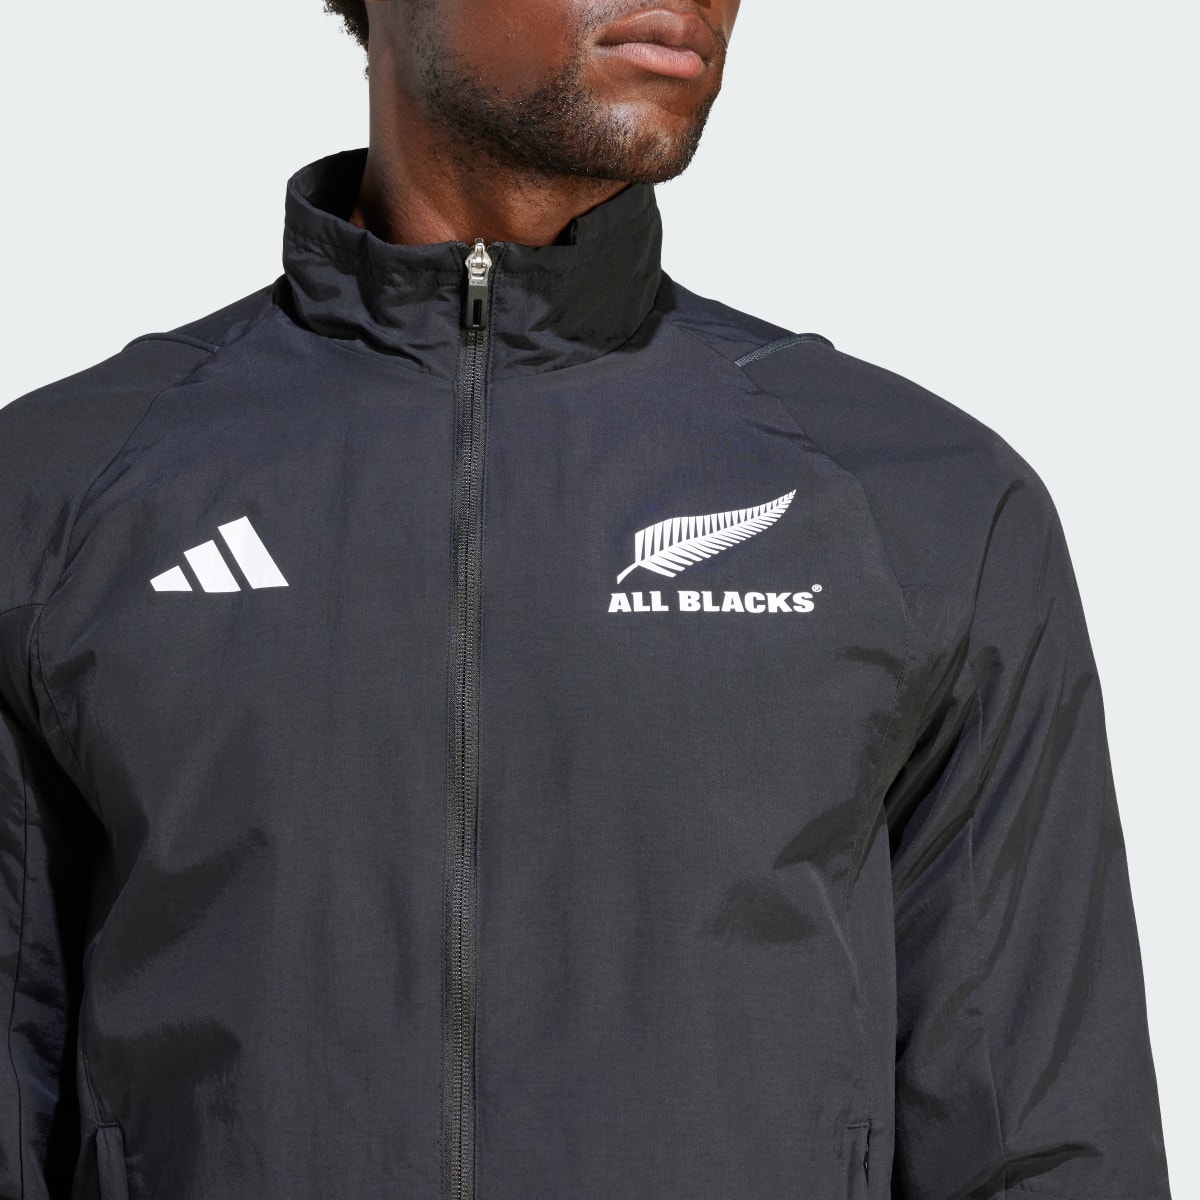 Adidas All Blacks Rugby Track Suit Track Top. 9